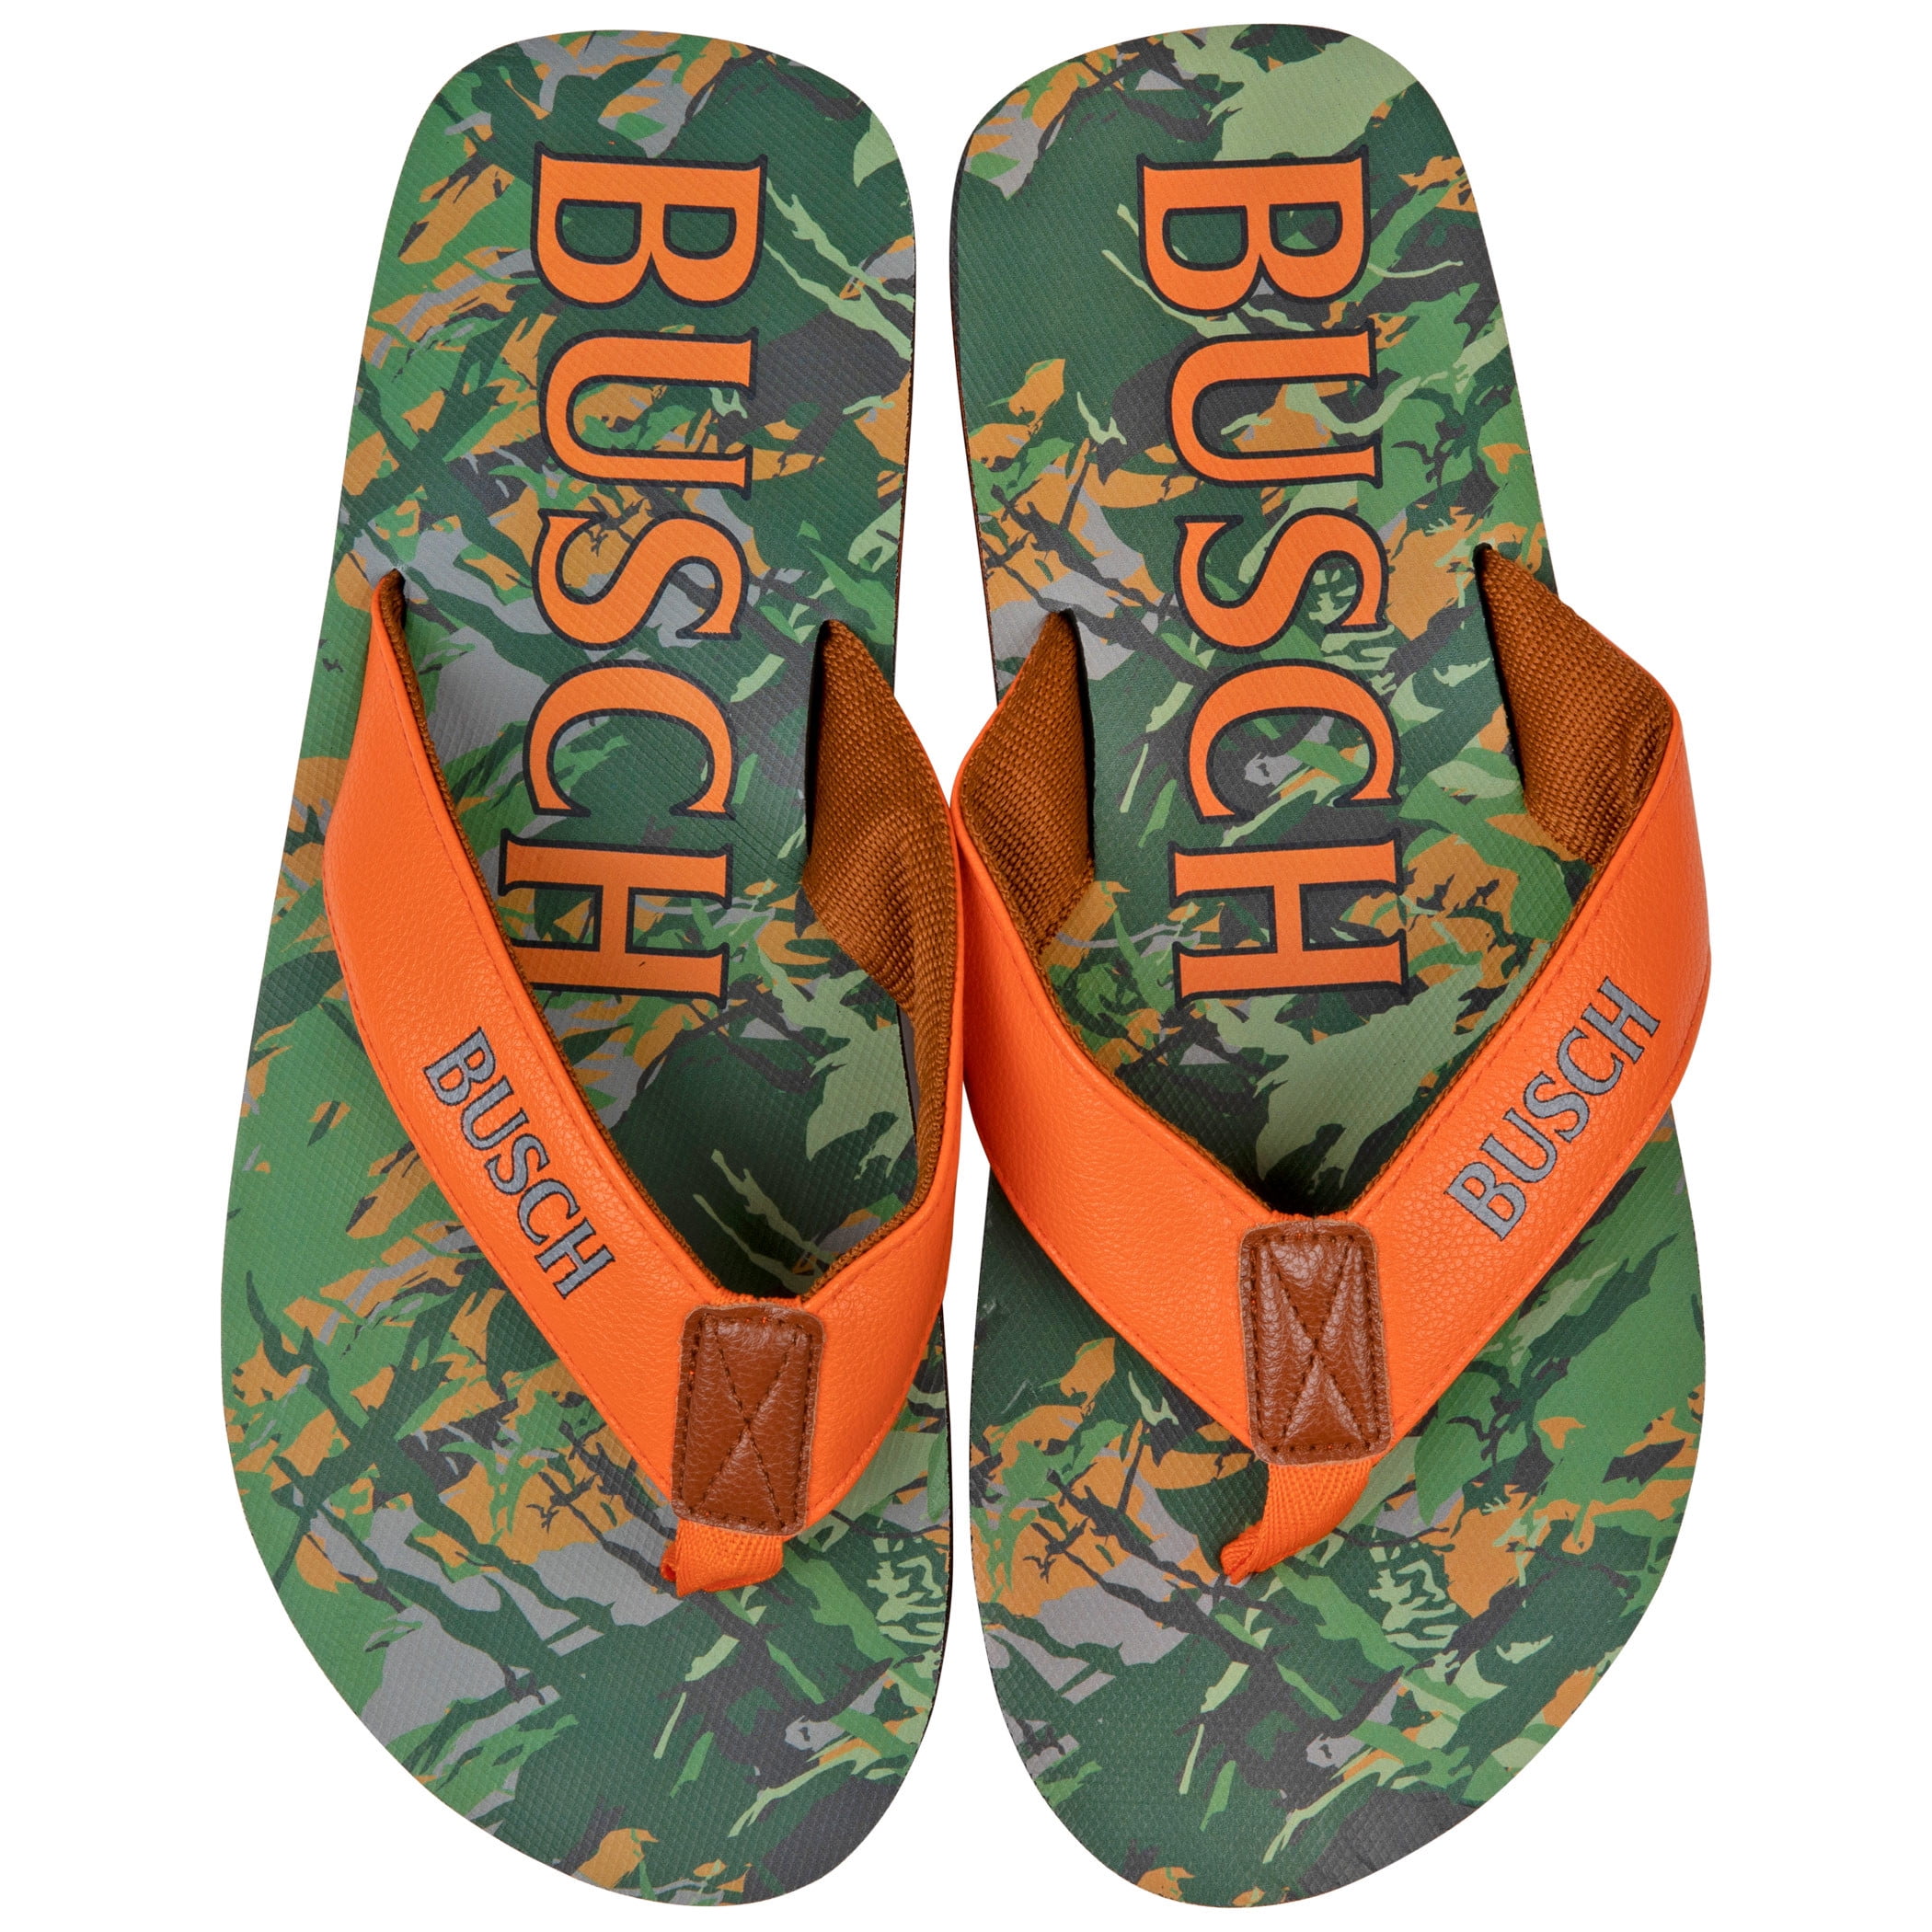 Girls Flip Flops Medium 13-1 Camouflage 2" Wedge Sandals Shoes NEW with Defect 